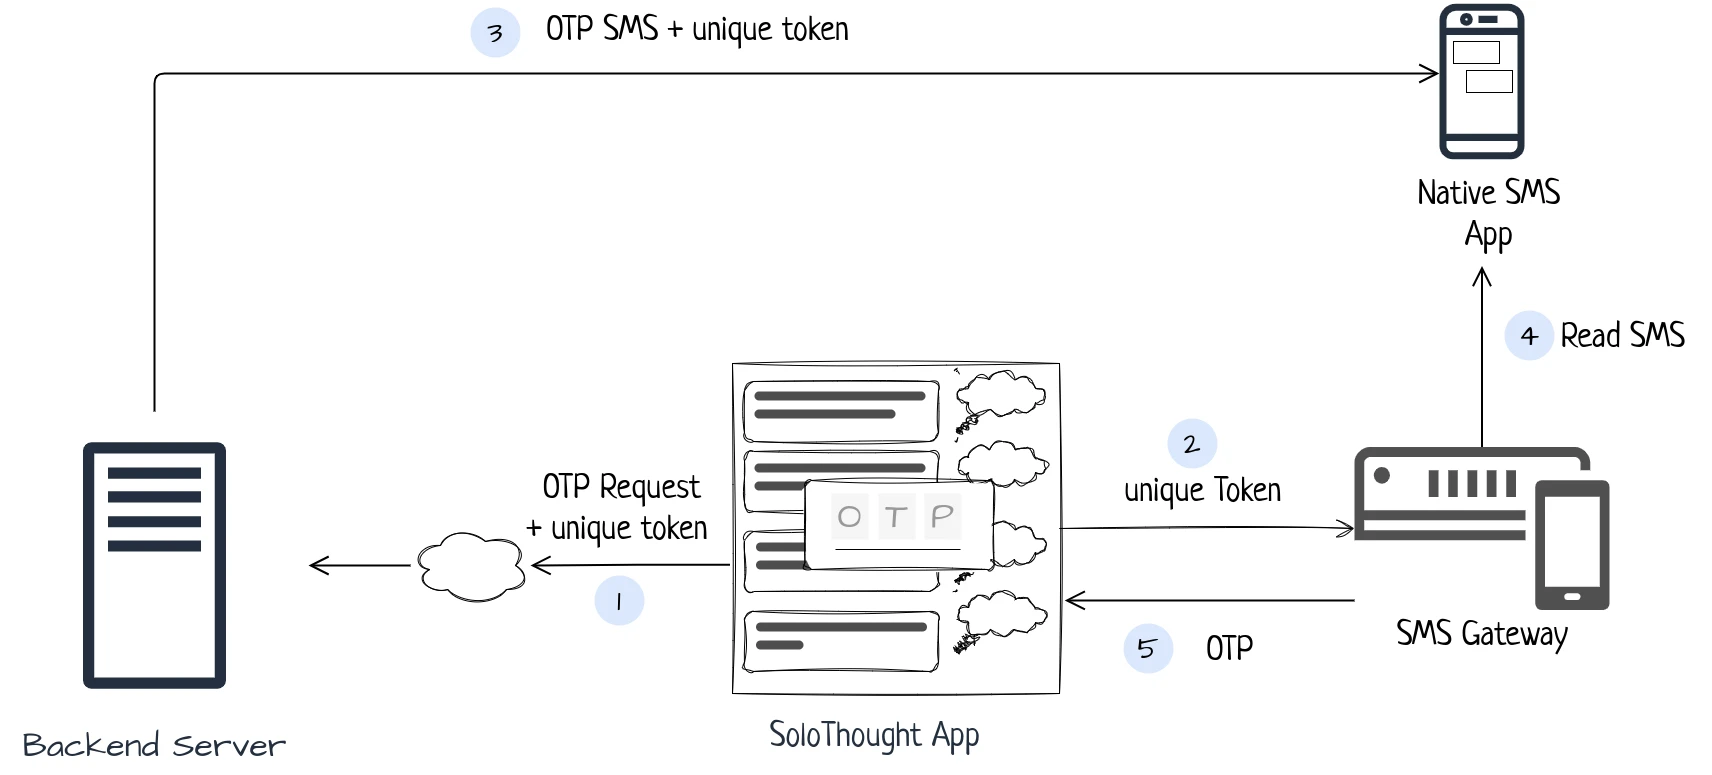 System Design to secure OTP from Eavesdropping Apps